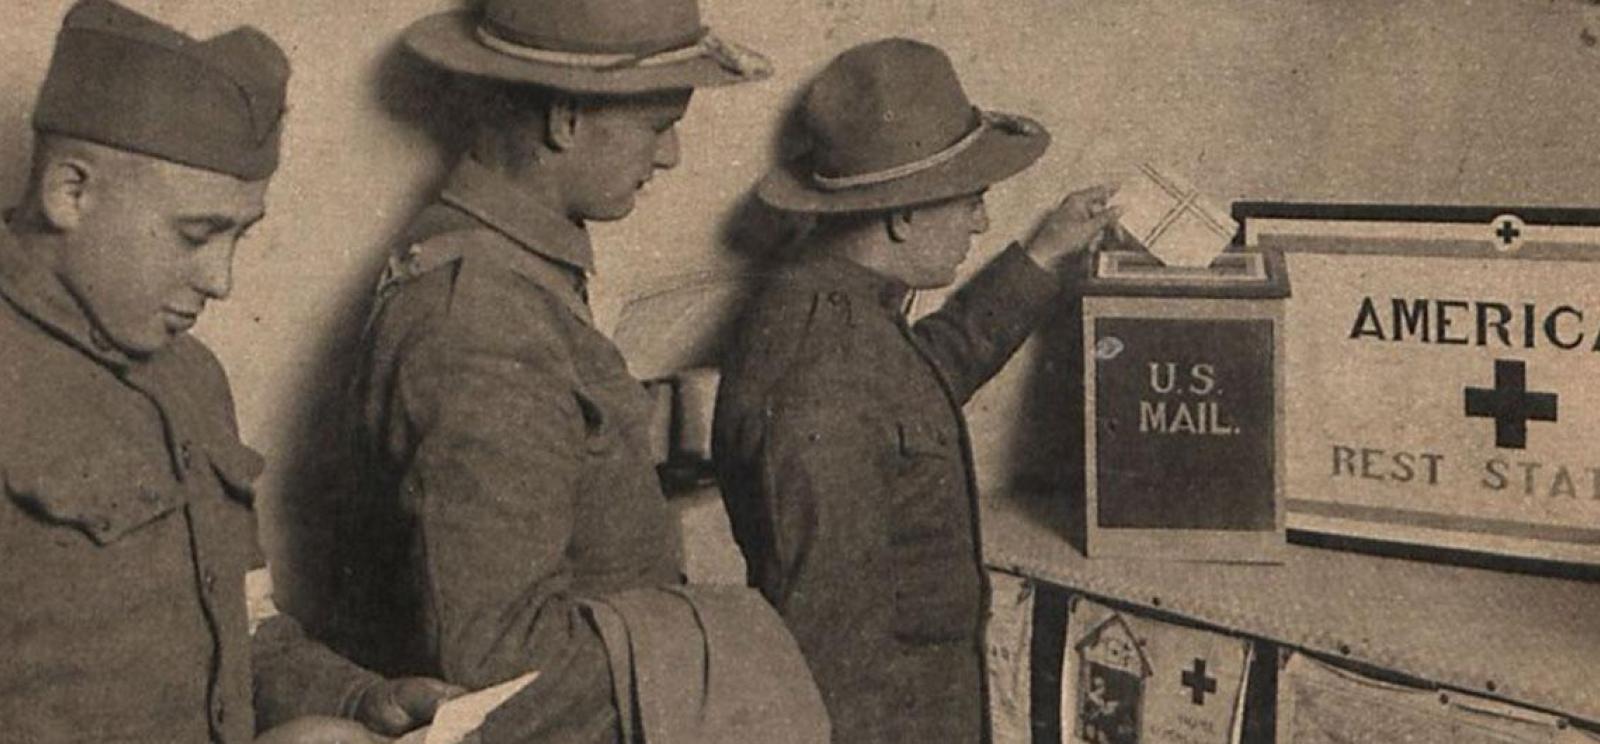 Black and white photograph of three men in military uniform lined up in front of a box labeled 'U.S. Mail'. The one at the front of the line is inserting an envelope into the box.